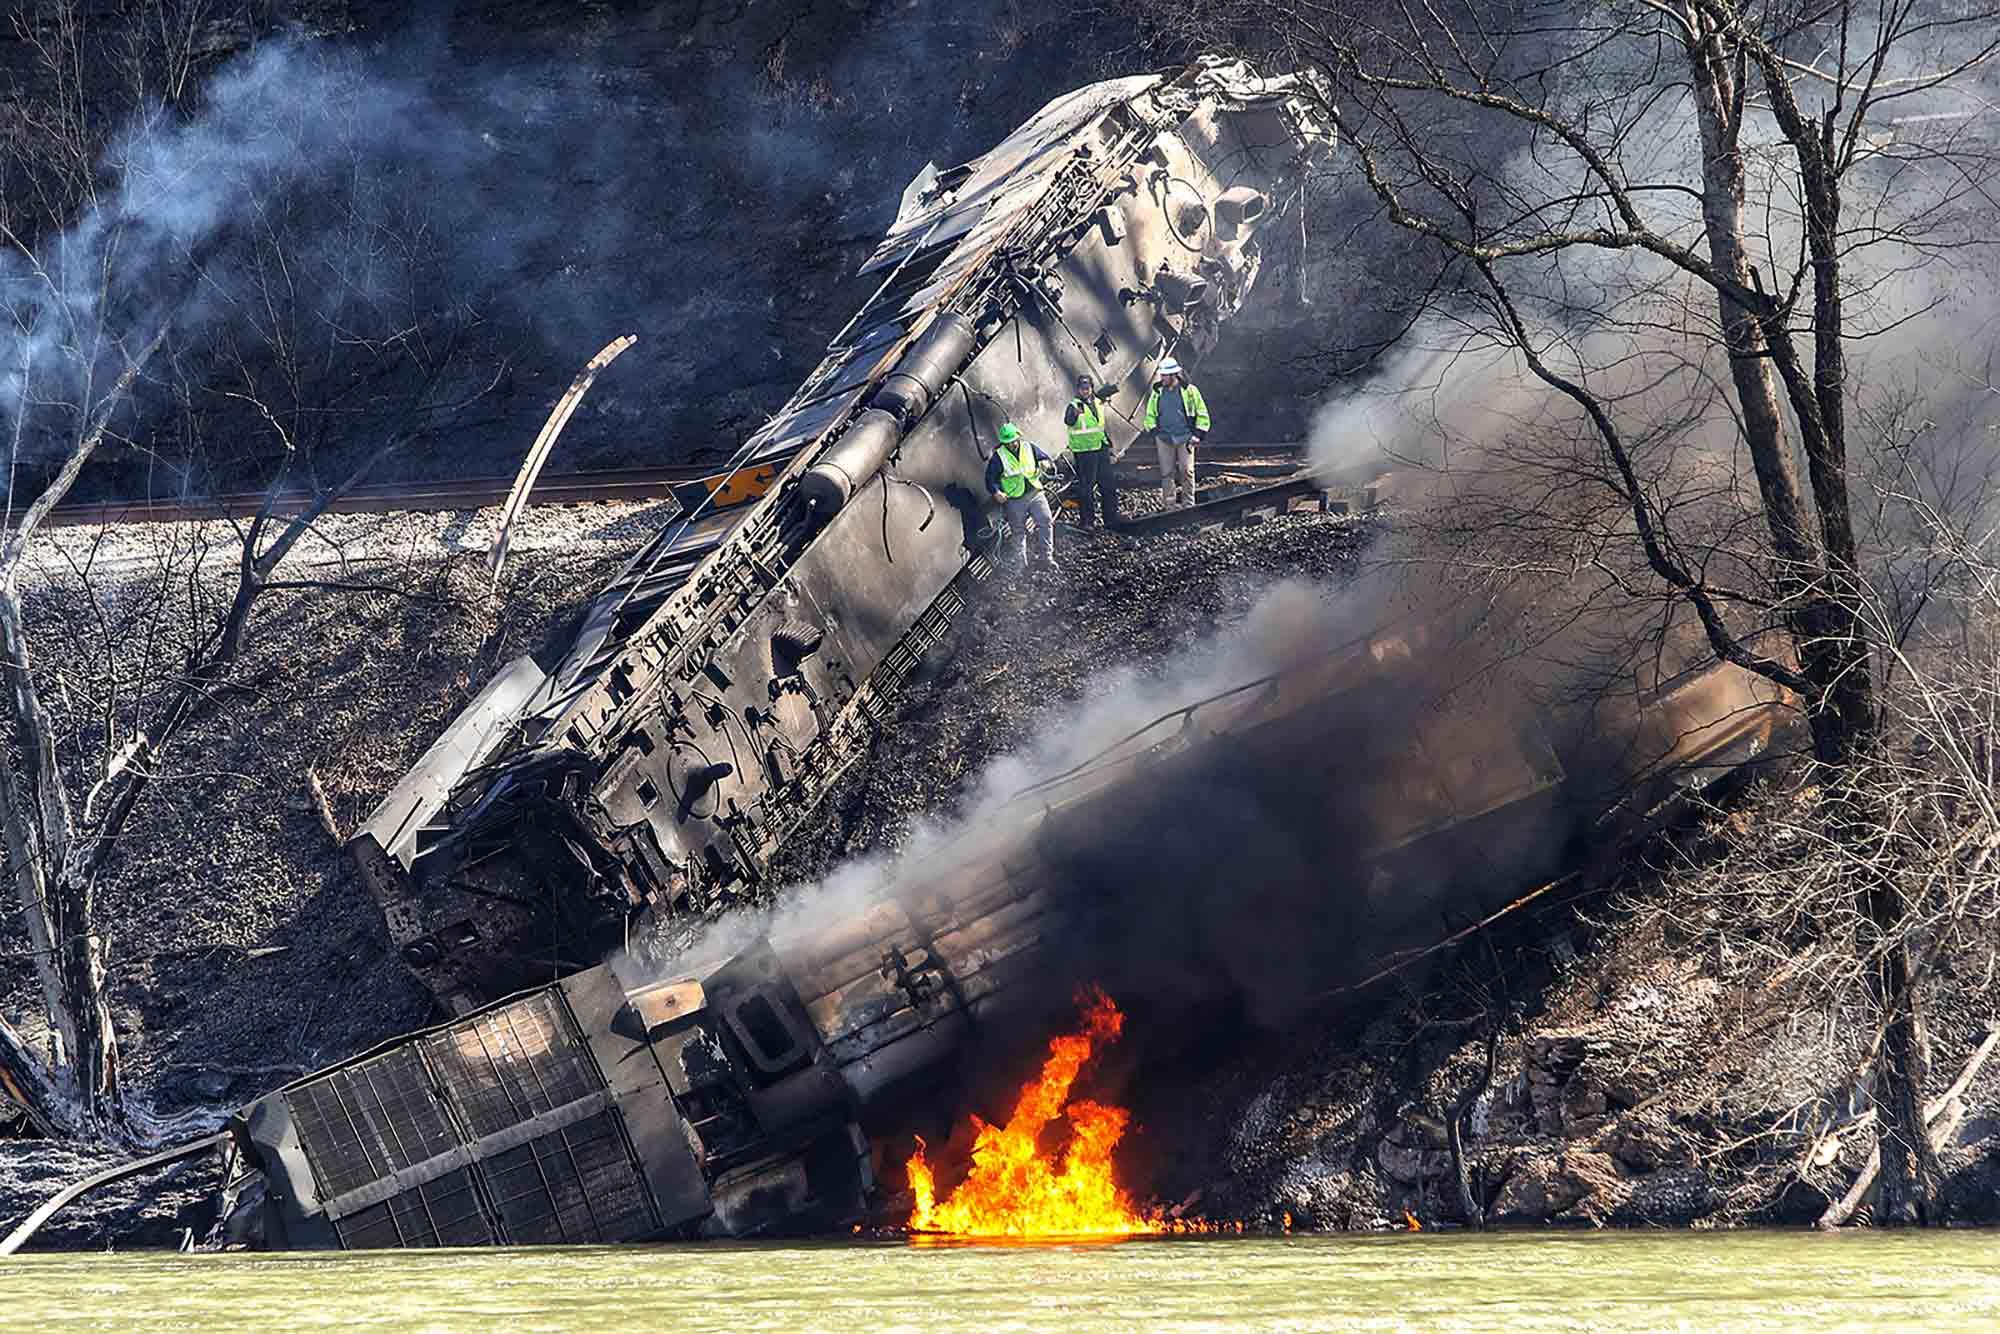 Smoke fills the sky after an empty CSX coal train hit a rockslide along tracks causing a fiery derailment on Wednesday, March 8, 2023 in a remote area just south of Sandstone, W.Va.